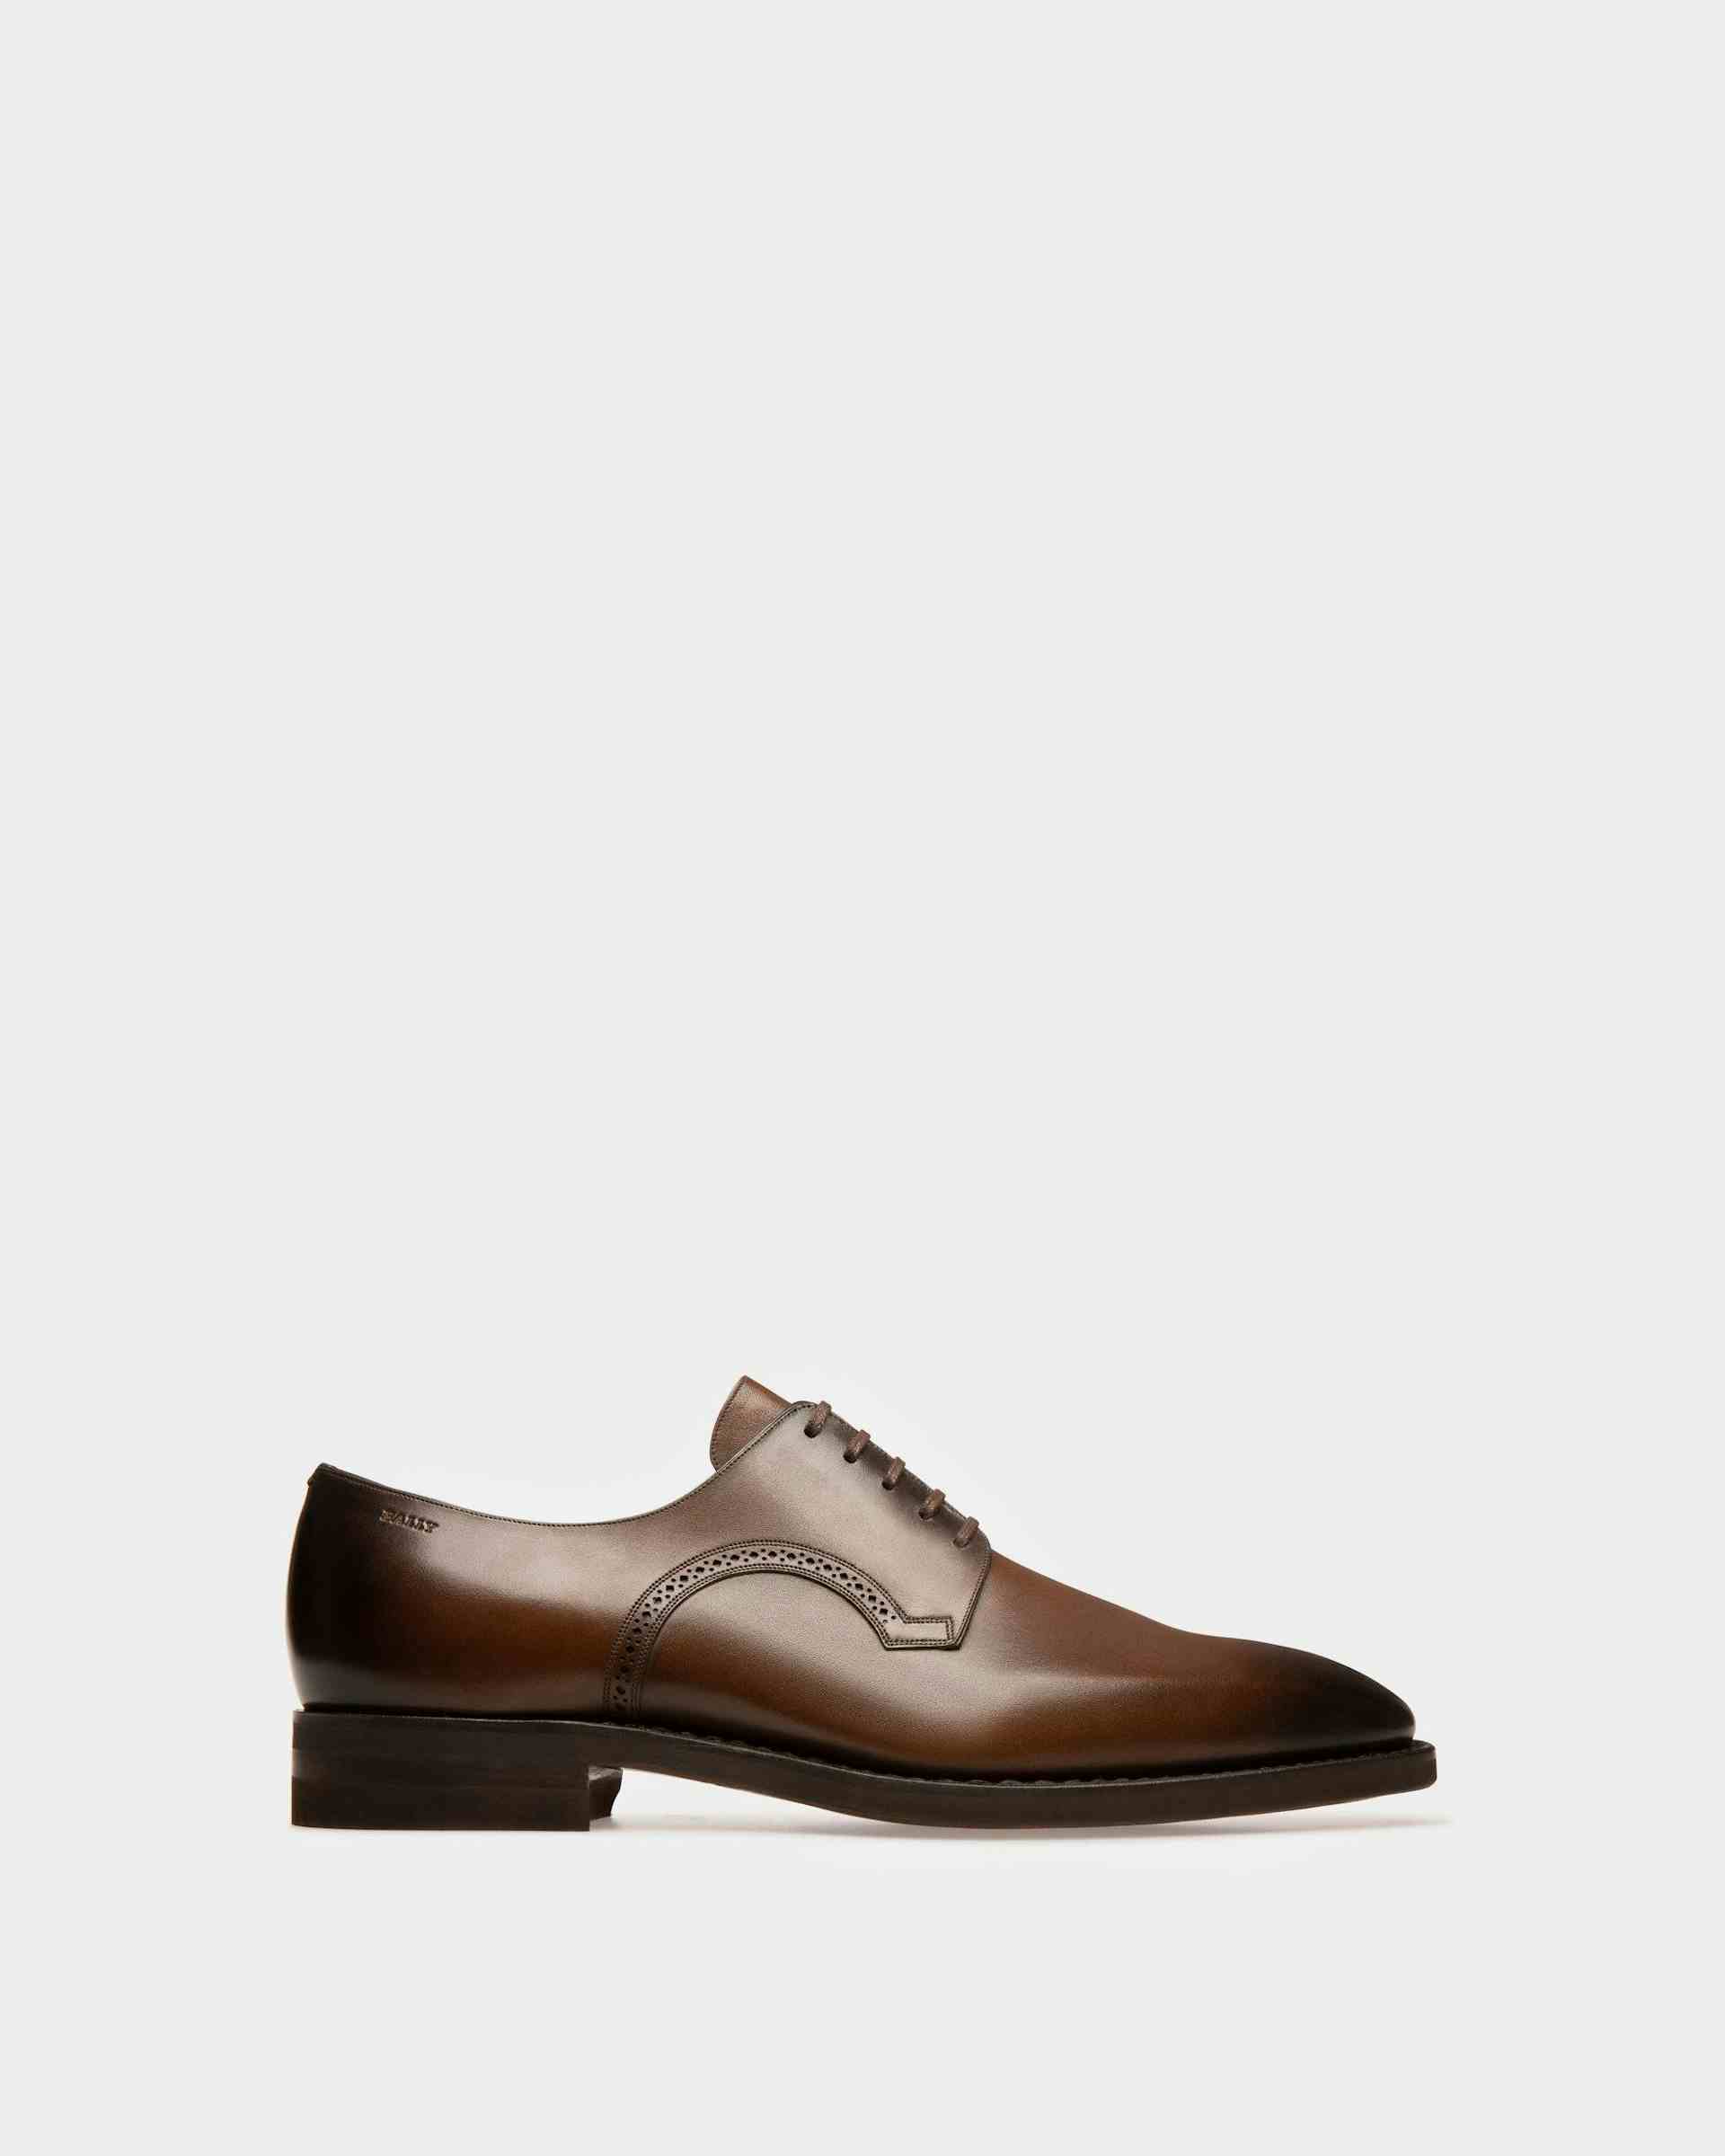 Scribe Novo Derby Shoes In Brown Leather - Men's - Bally